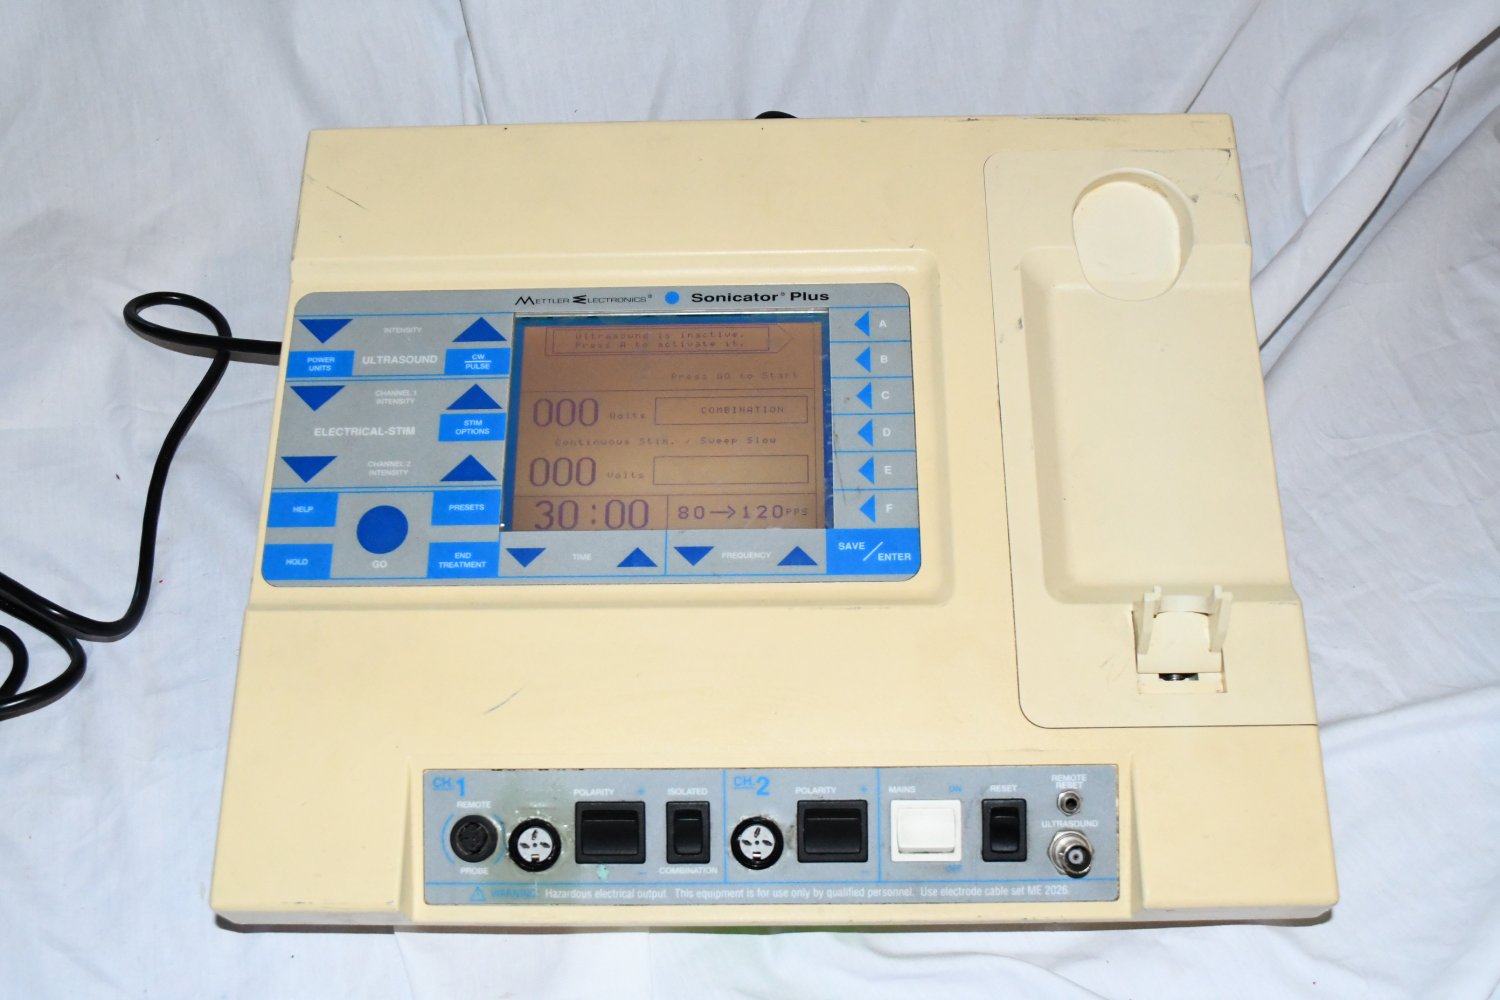 mettler me-900 sonicator plus ultrasound therapy system main unit 515c1 6/22